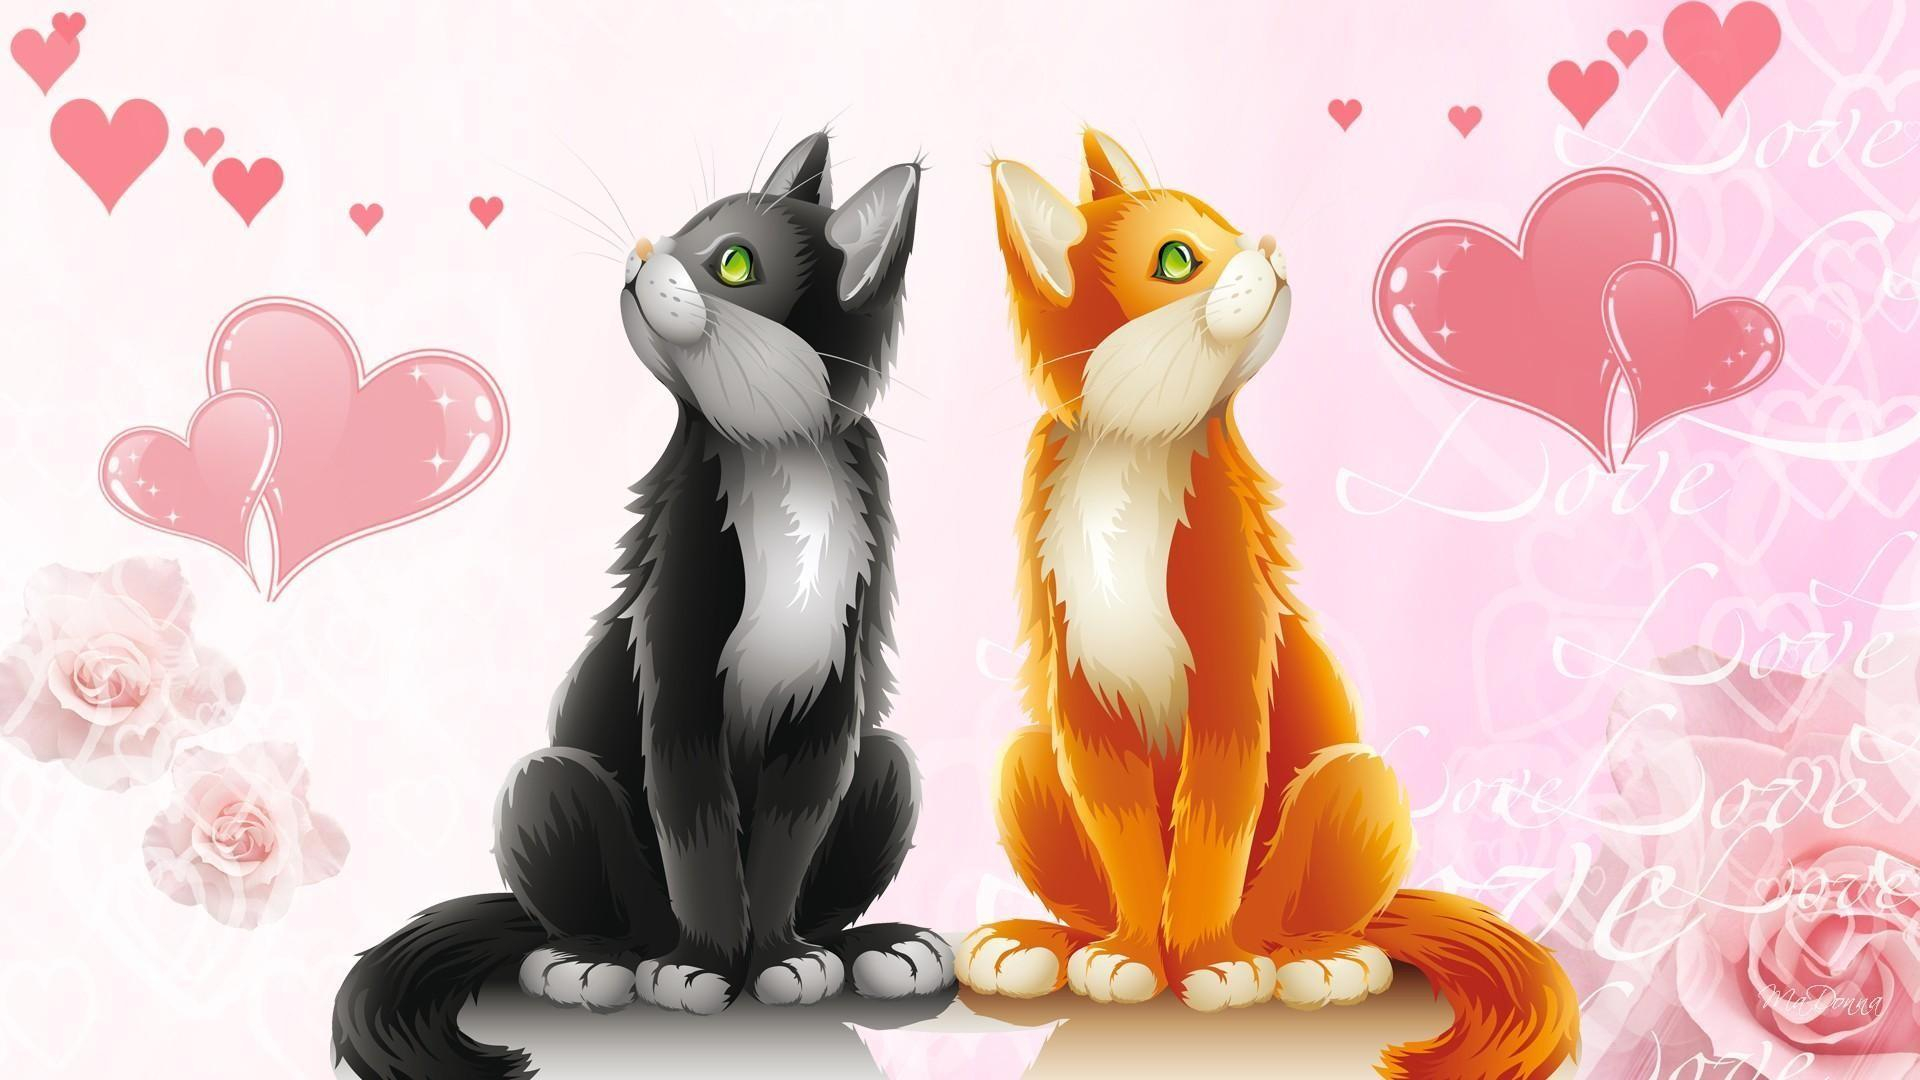 1920x1080 Kittens Valentines Wallpapers